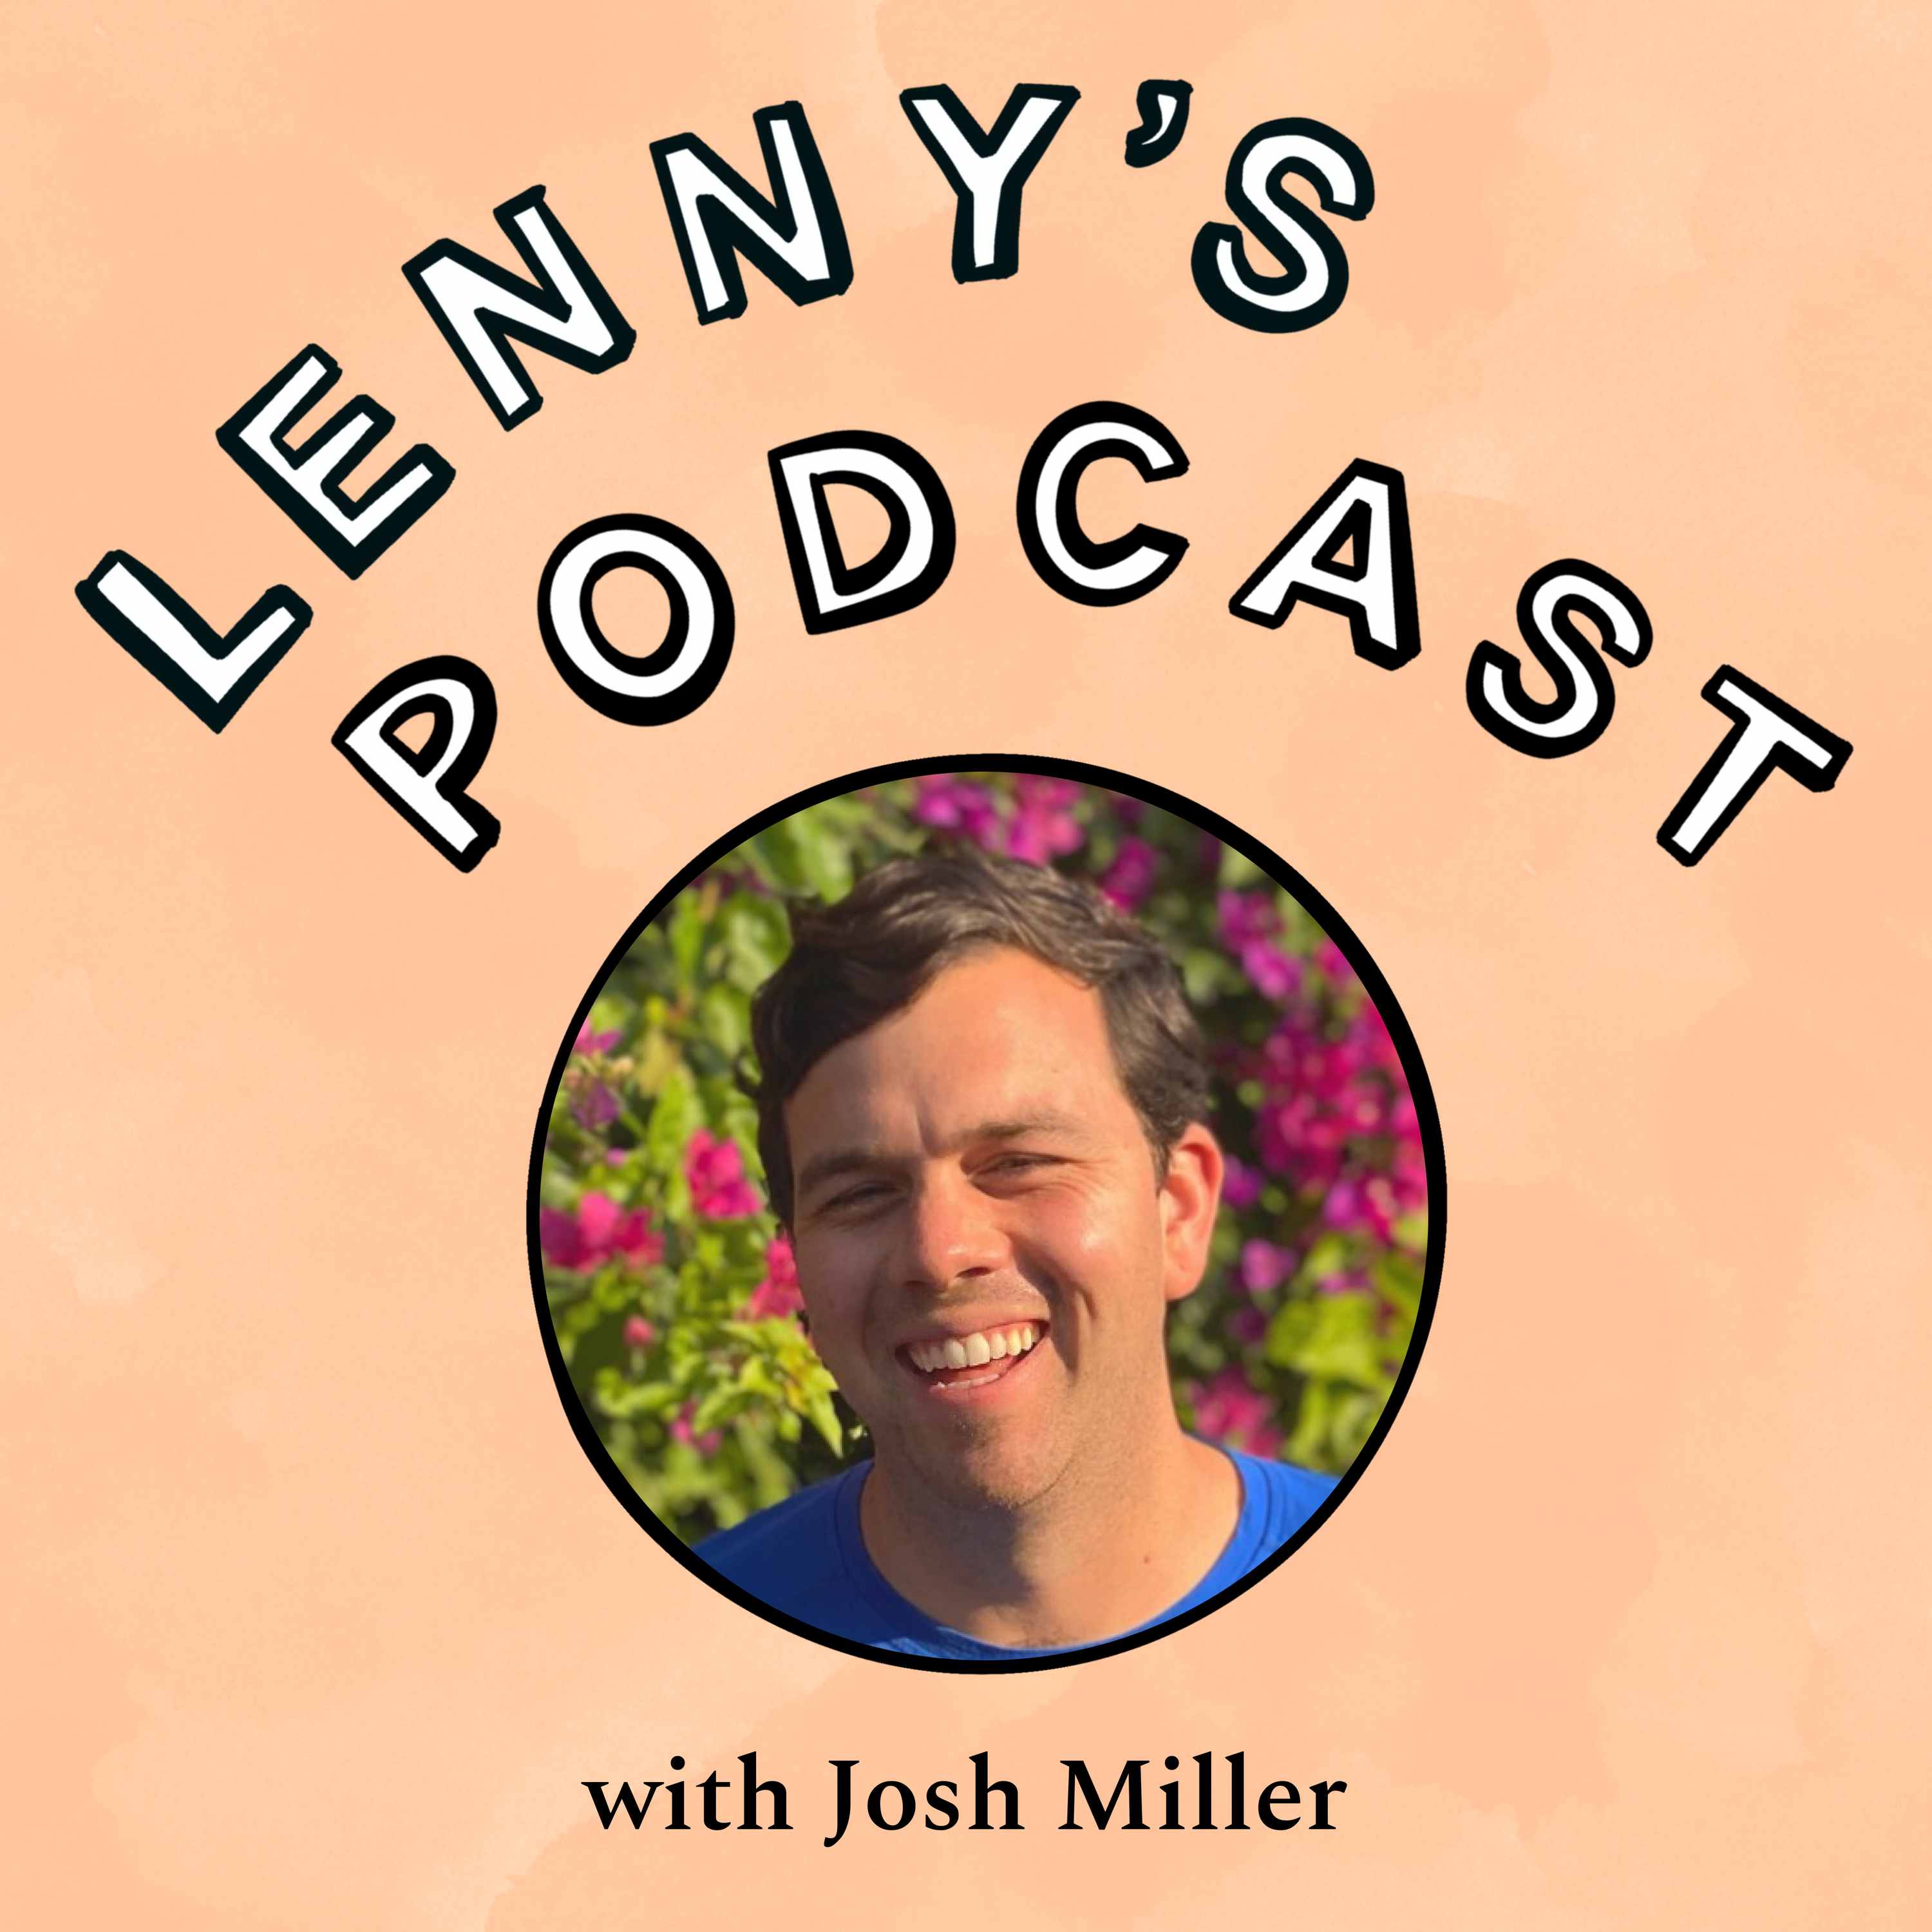 Lenny's Podcast: Product, Growth